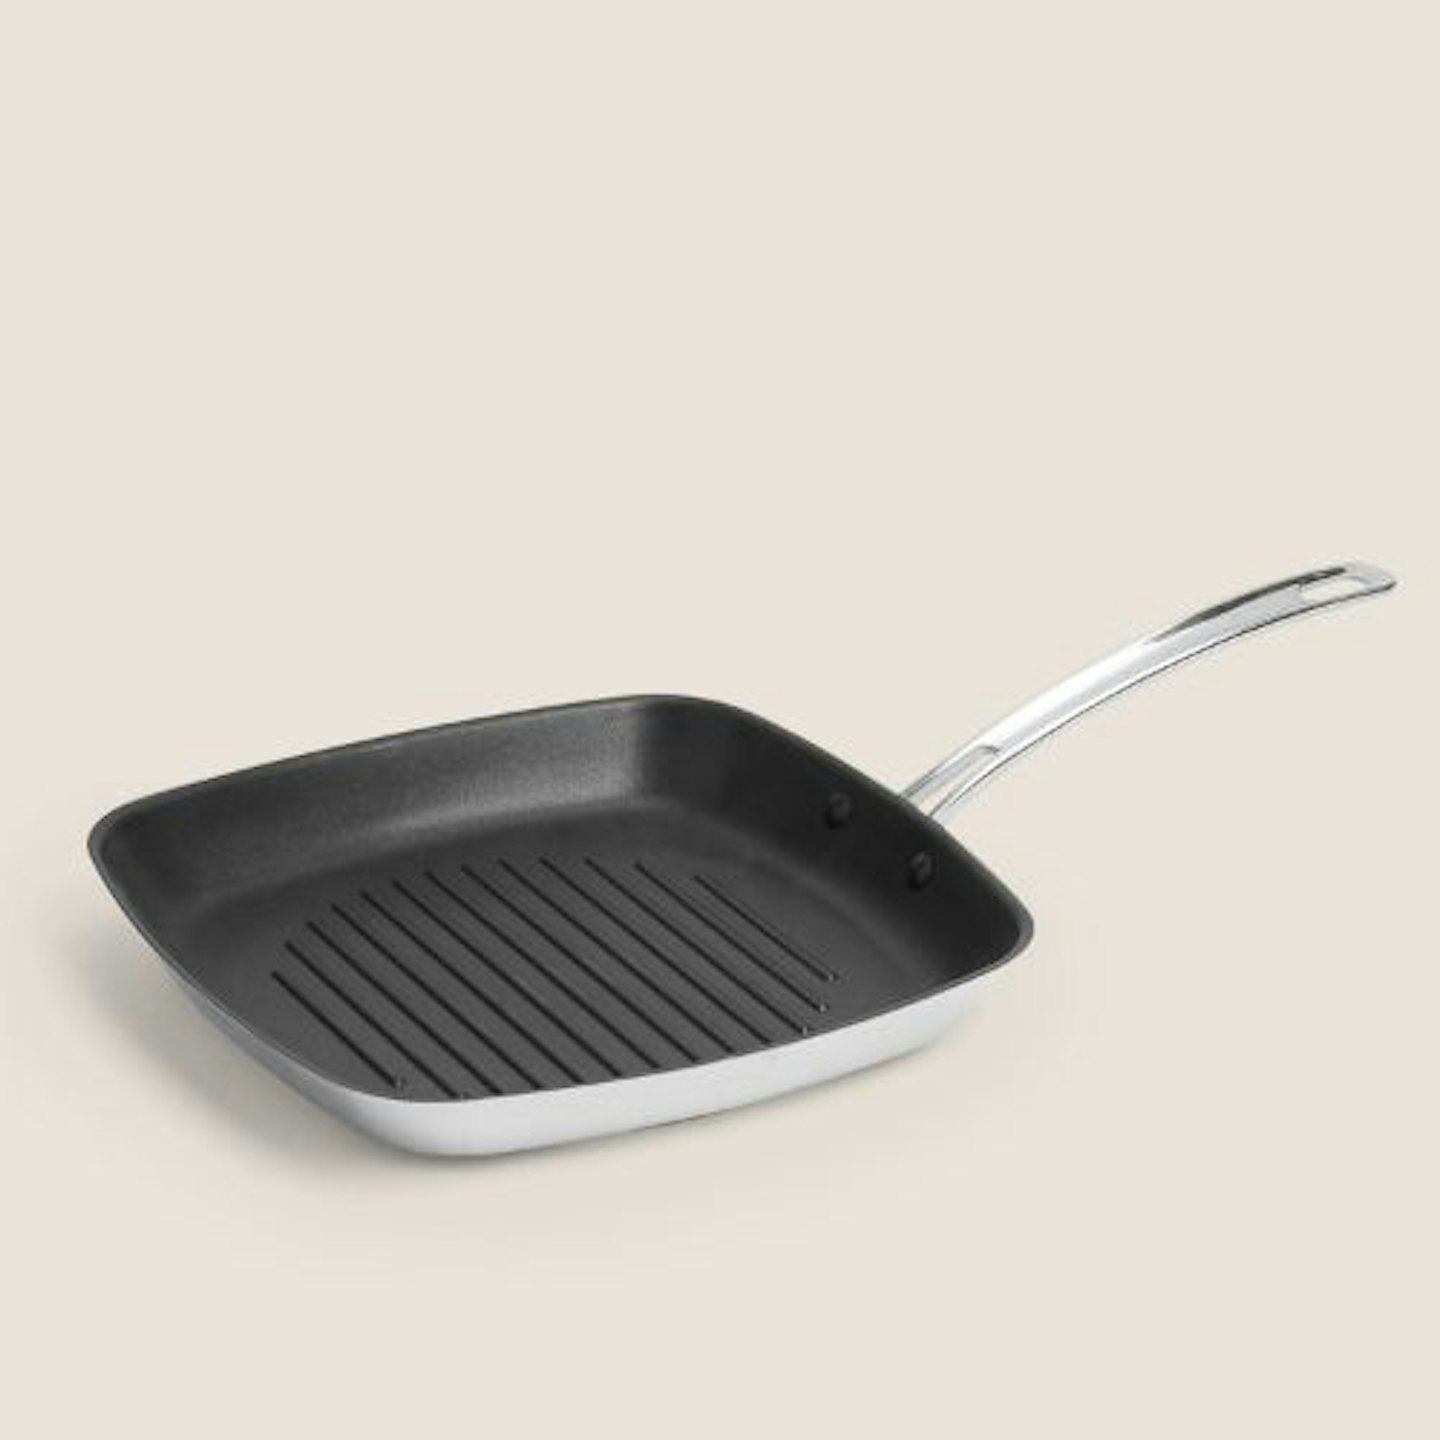 https://images.bauerhosting.com/affiliates/sites/10/2023/09/Collection-Stainless-Steel-Large-Non-Stick-Griddle-Pan.jpg?auto=format&w=1440&q=80